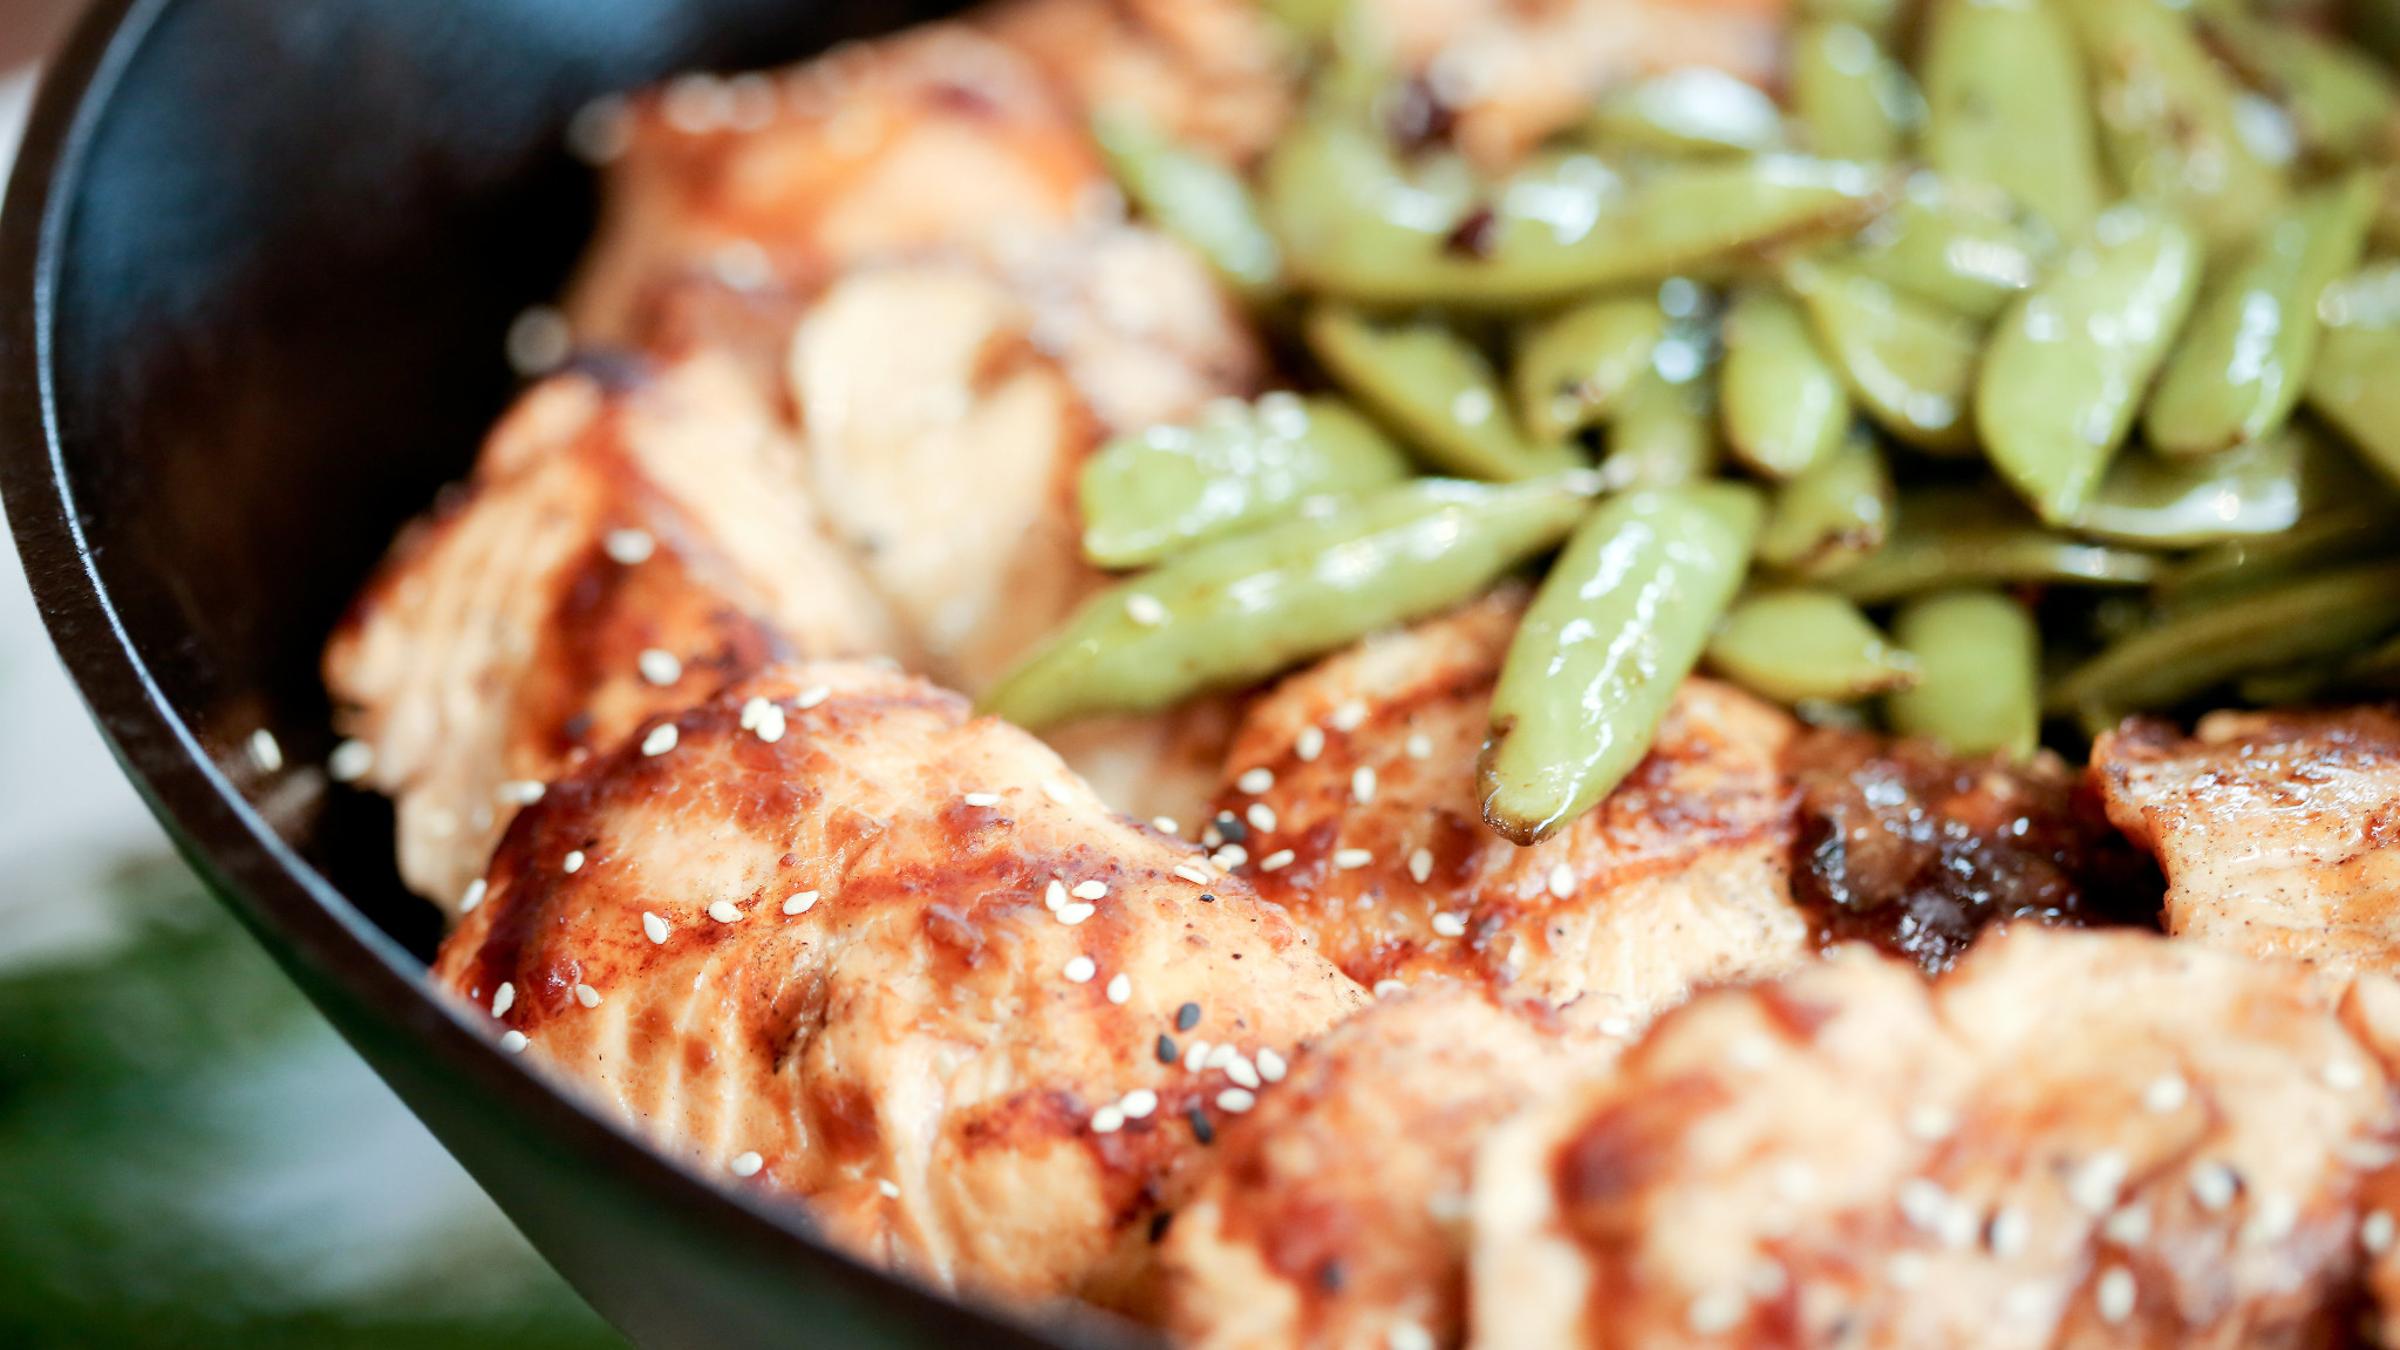 Chicken and green beans from Deer Valley Resort